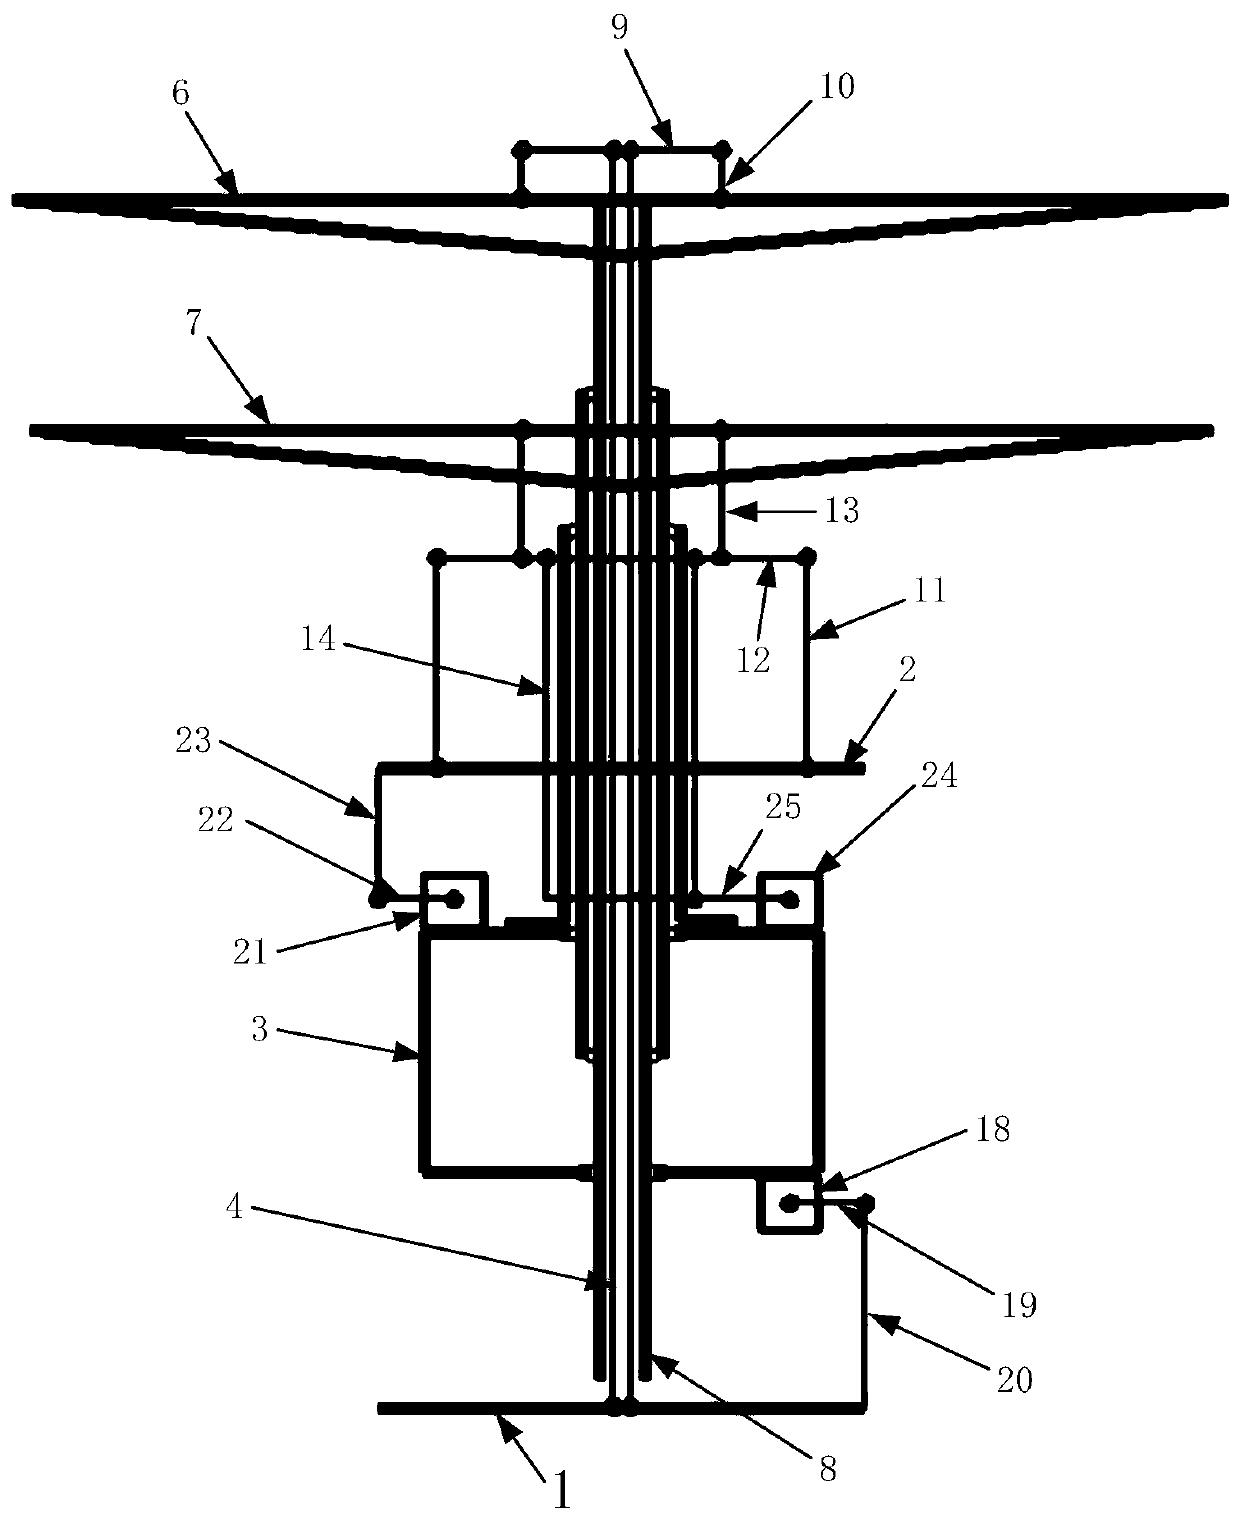 A Coaxial Helicopter Control System with Variable Parallelism of Up and Down Rotor Tilters